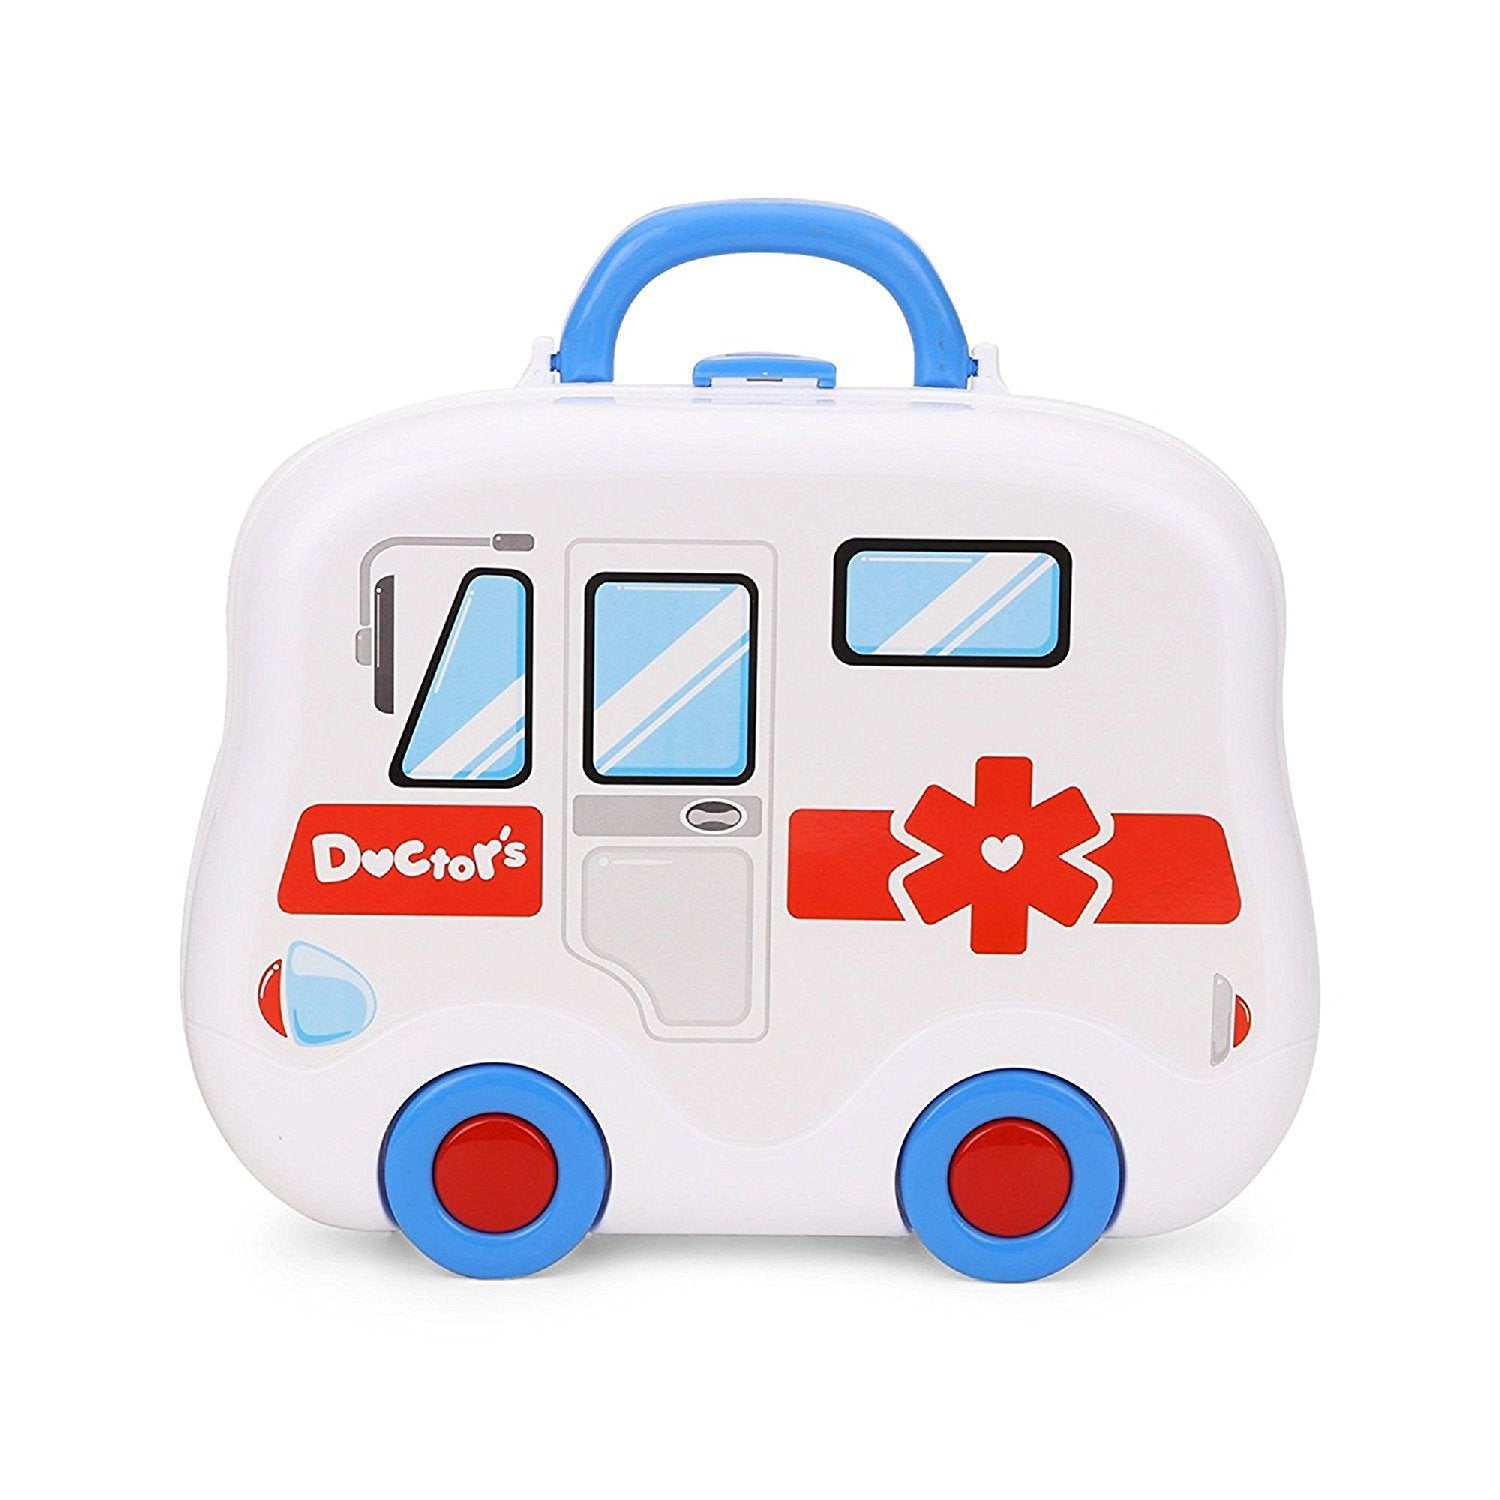 Doctor 2 in 1 Pretend & Play Little Doctor Briefcase Set